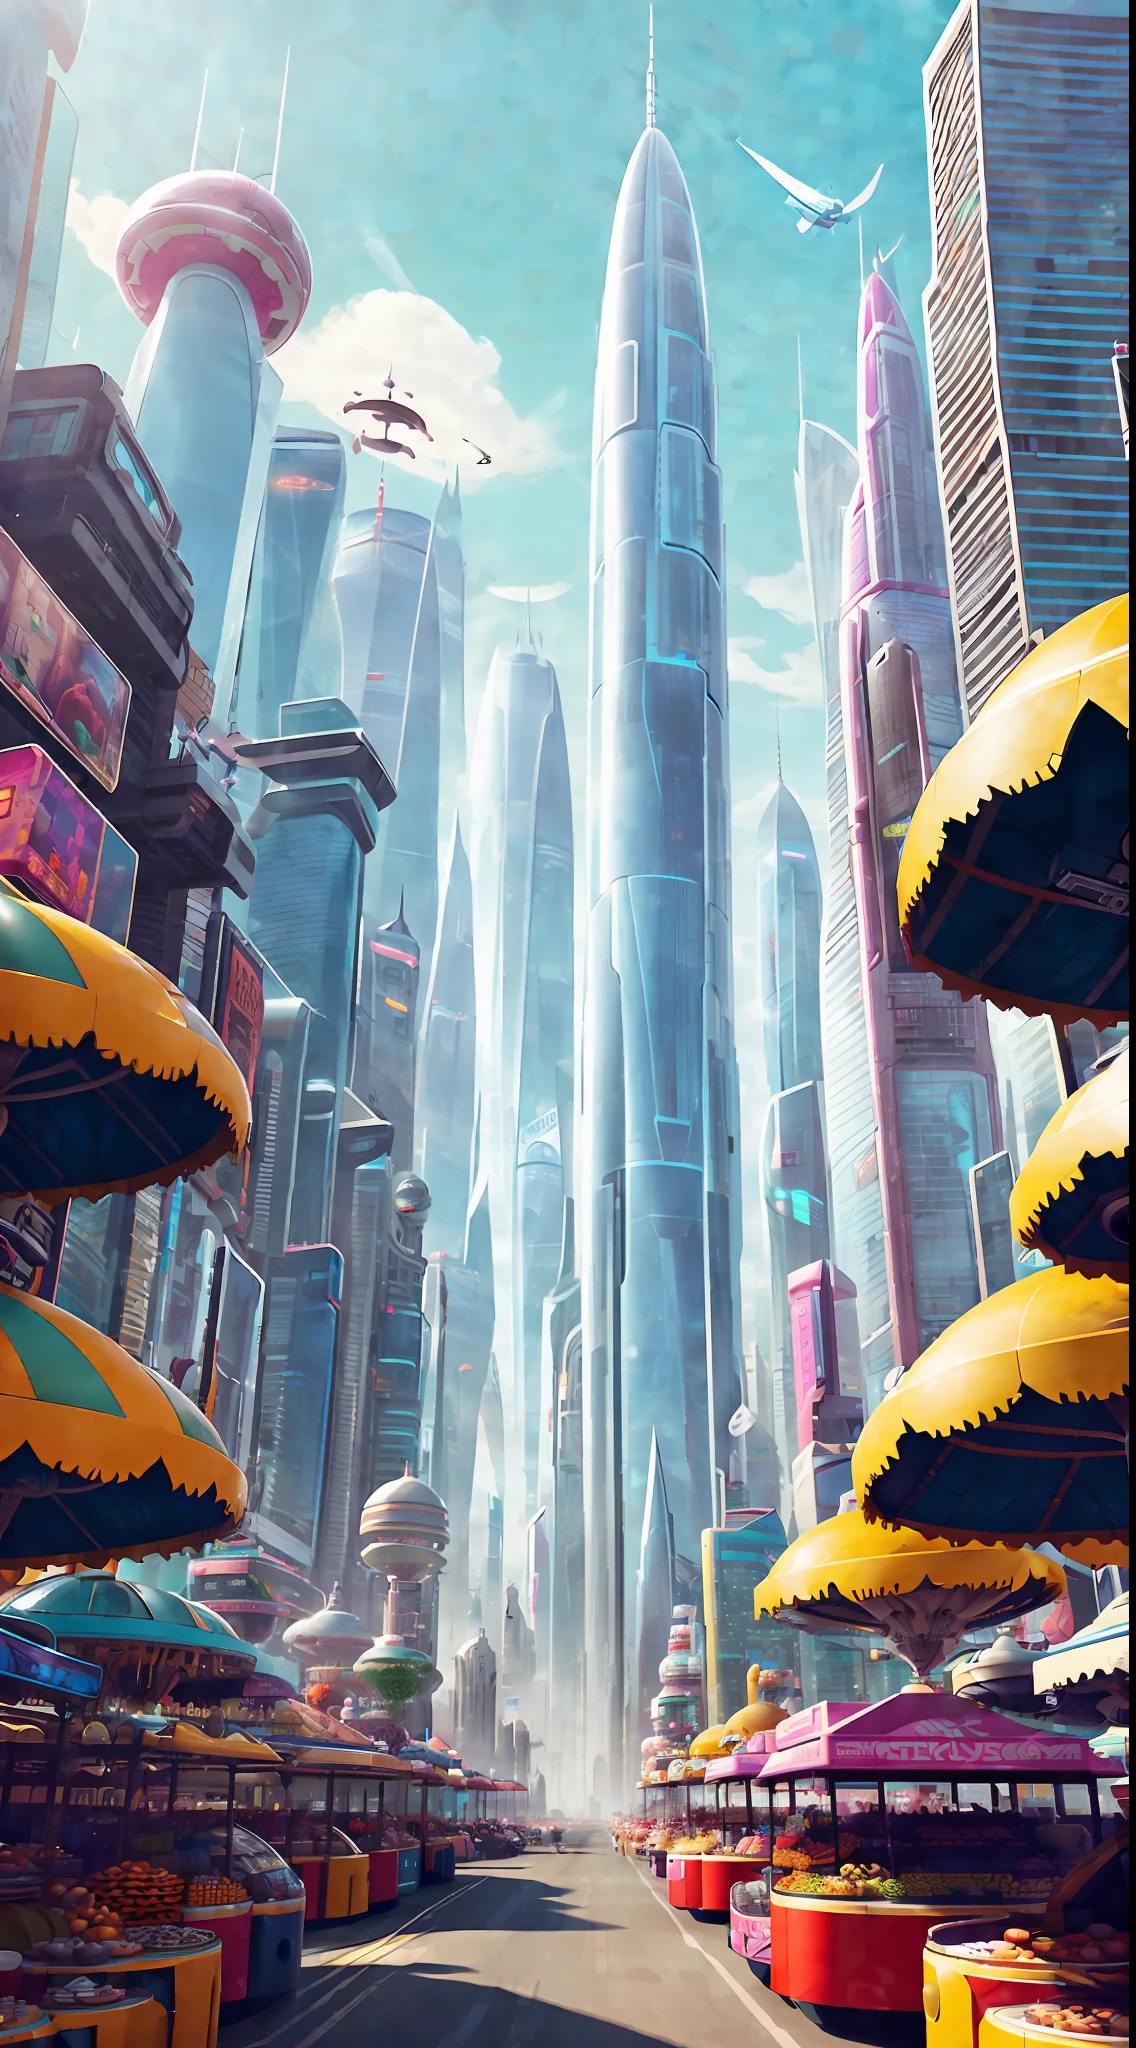 A bustling futuristic cityscape with floating skyscrapers and hovercars zooming between them. In the center of the city is a massive outdoor marketplace, filled with colorful stalls selling a wide variety of bizarre alien goods. The overall tone is lighthearted and whimsical, by Justin Maller